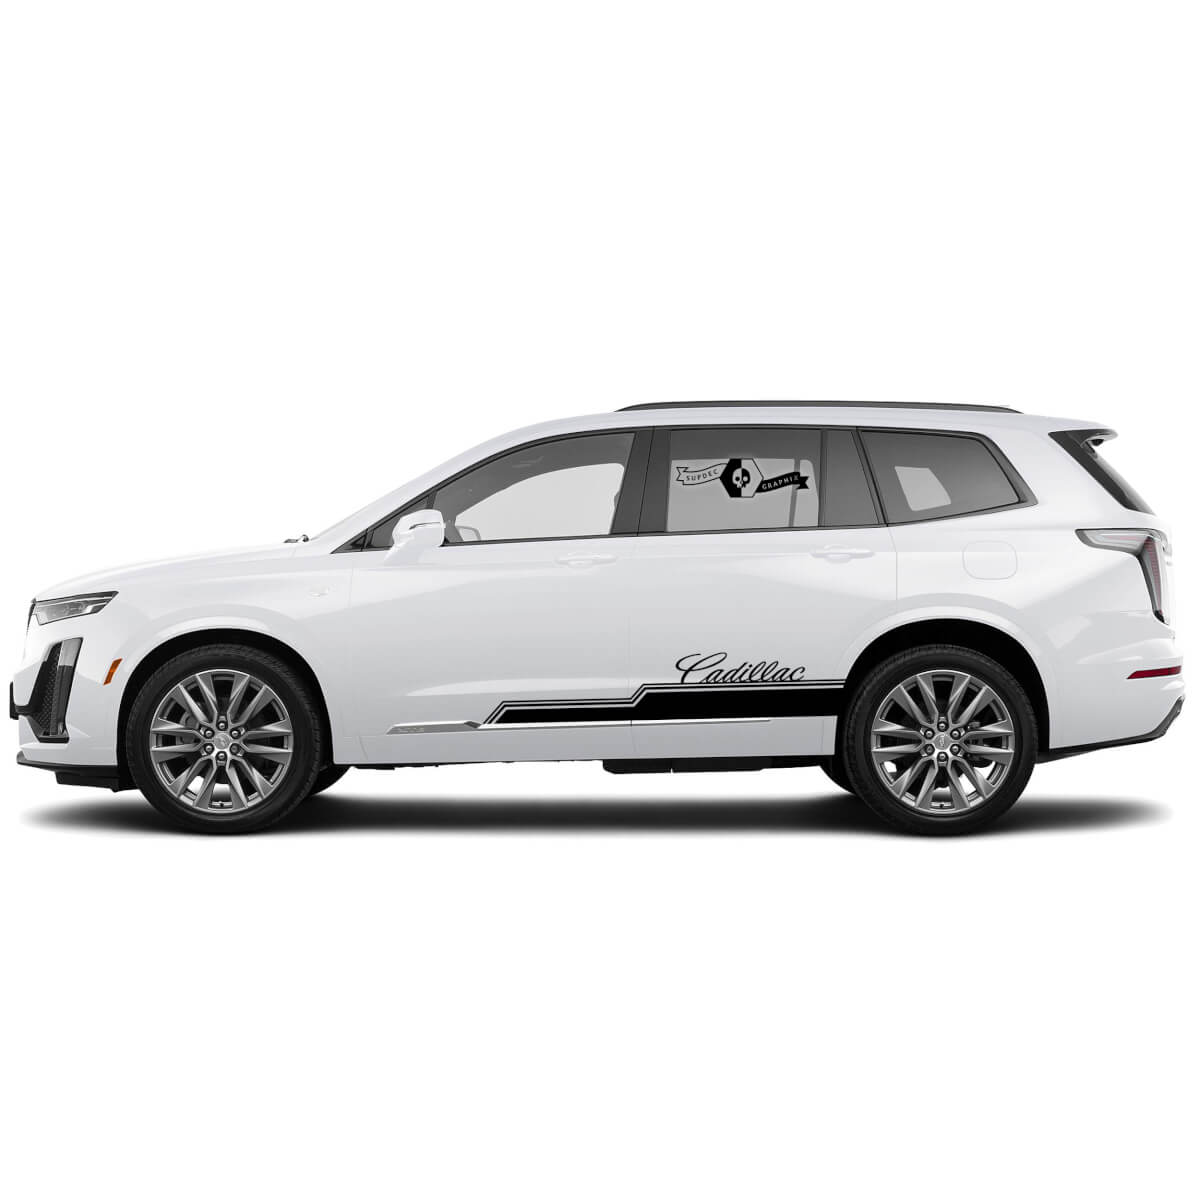 2021 Cadillac XT6 Side SUV Vinyl Decals Stickers
